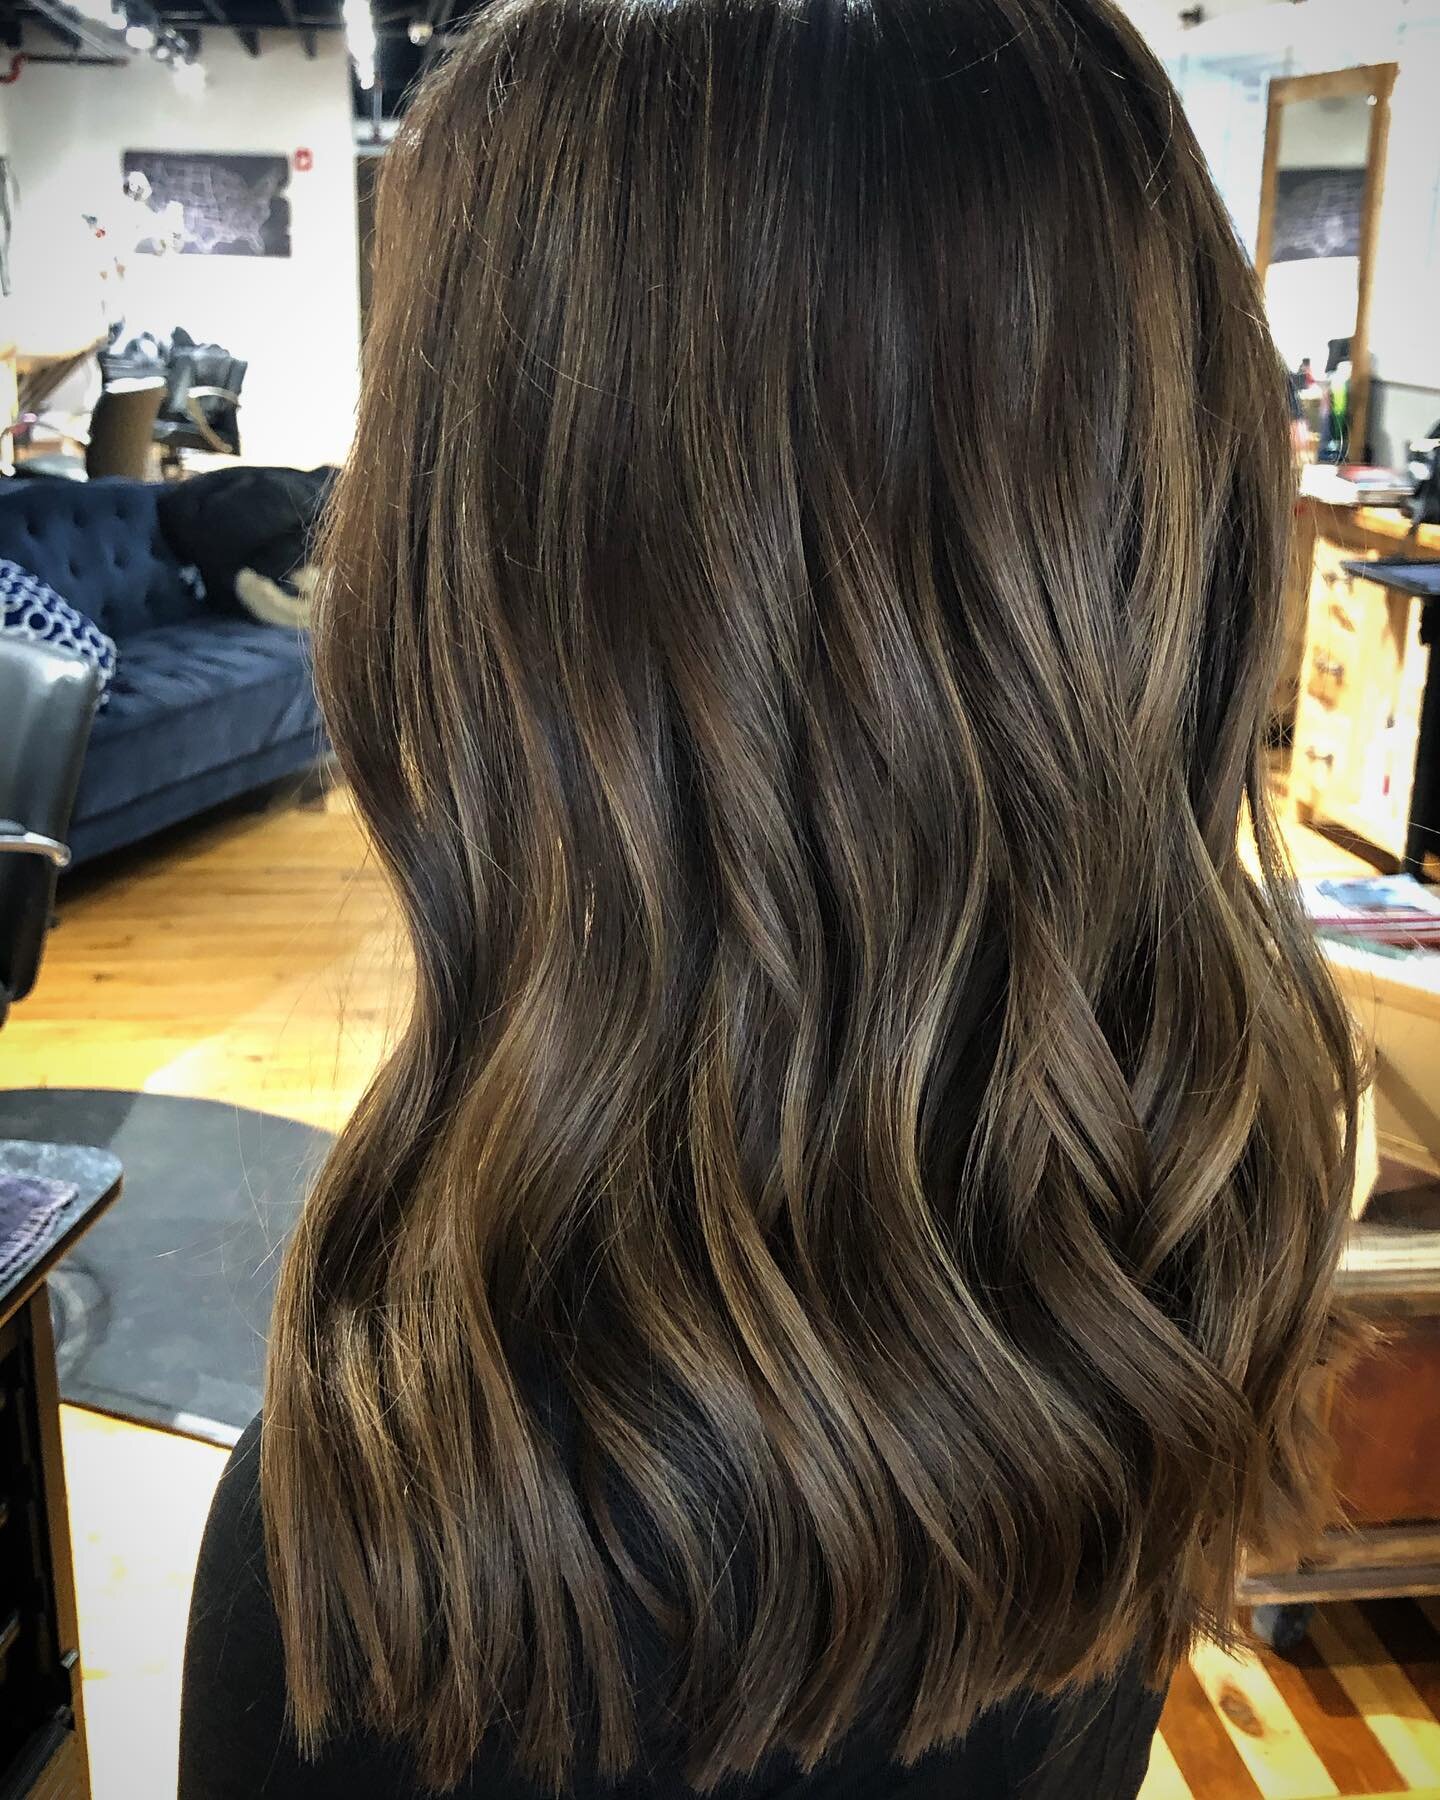 After and Before pictures of a soft Balayage Highlight to add dimension and subtle contrast.